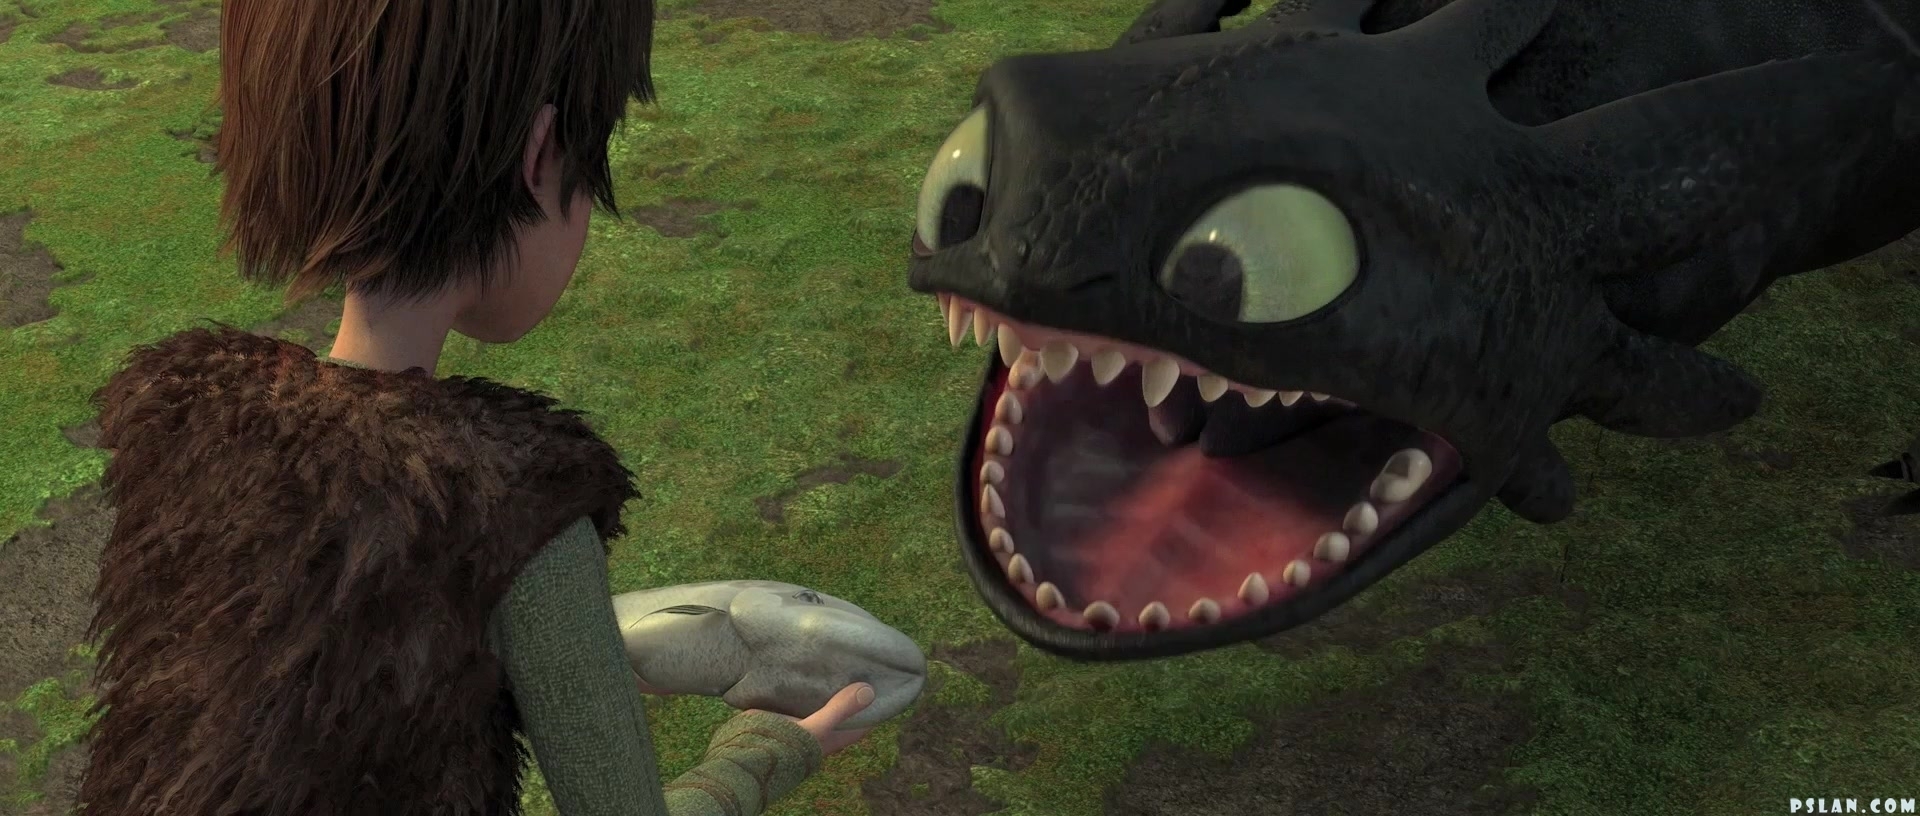 Train Your Dragon Image Hiccup Toothless Wallpaper Photos